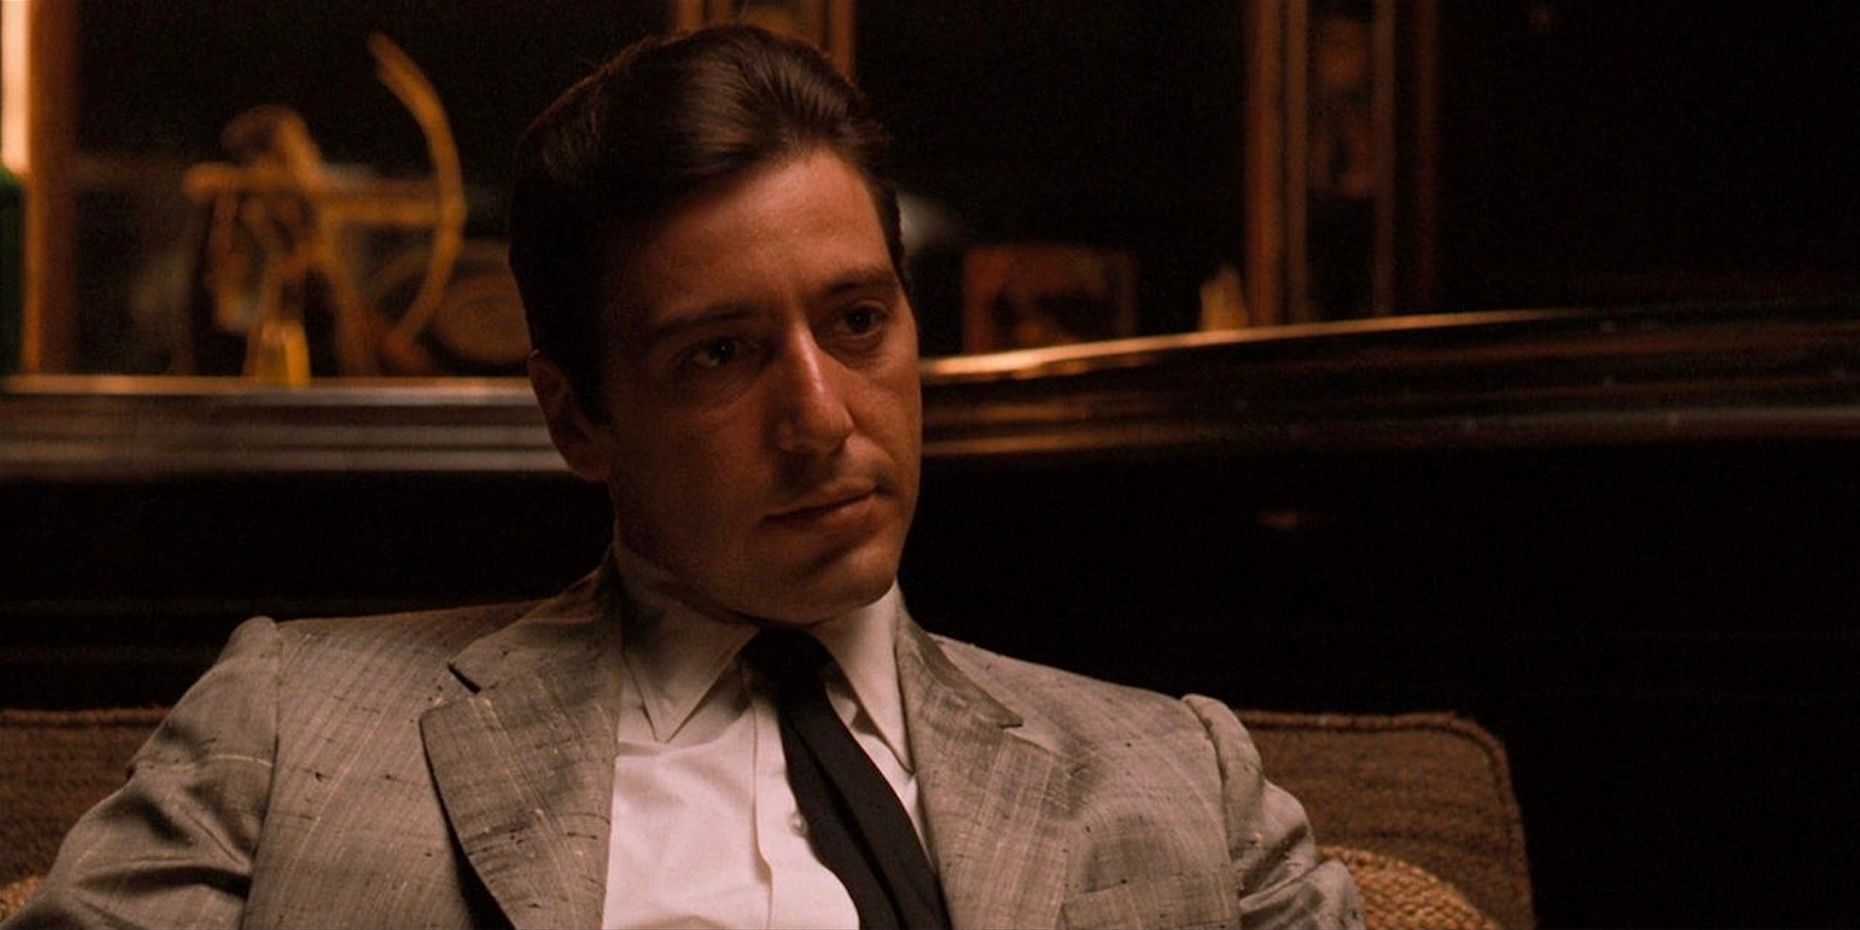 THE GODFATHER PART II 2 - AL PACINO SITTING IN CHAIR